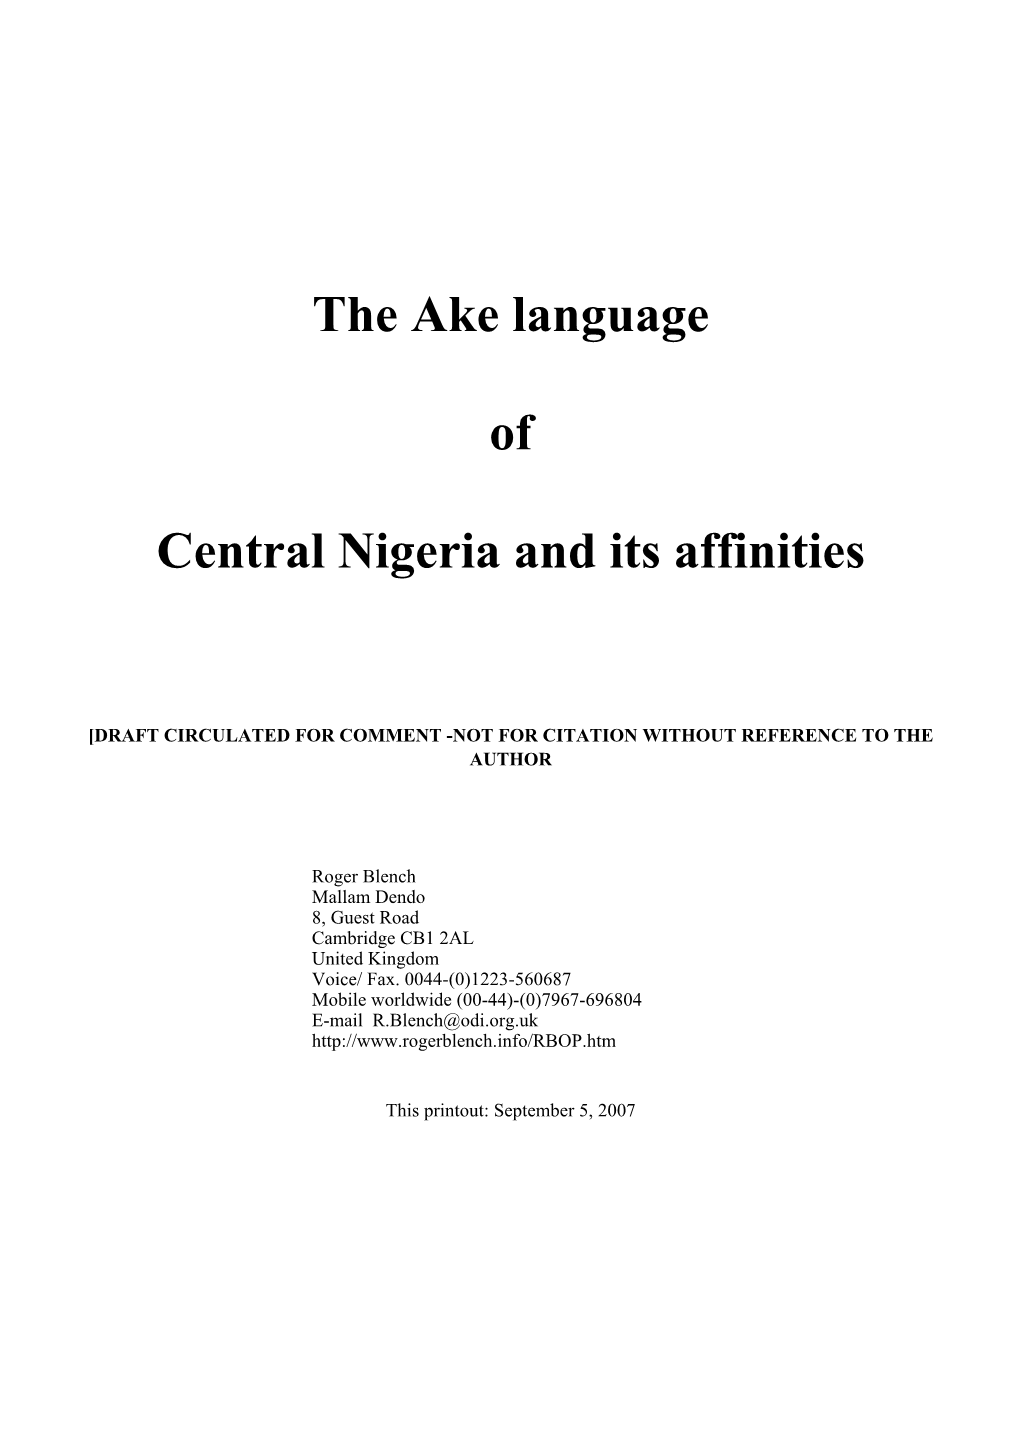 The Ake Language of Central Nigeria and Its Affinities